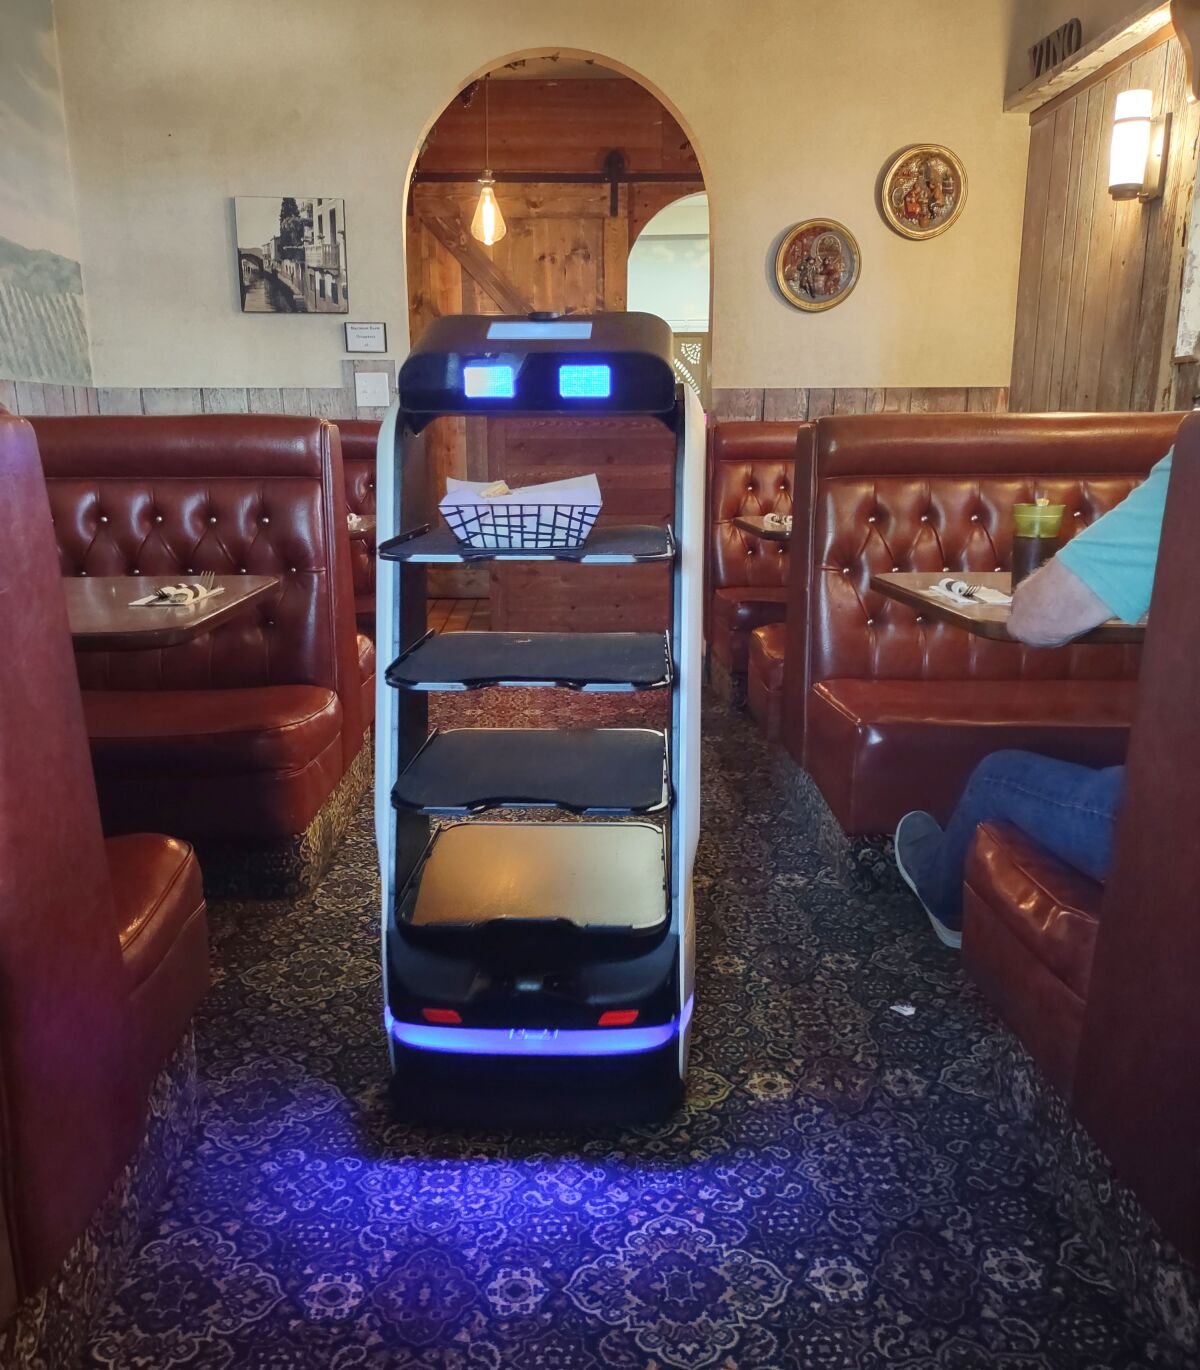 Rosie the robot delivers a basket of garlic bread to guests at Mamma Ramona’s restaurant.